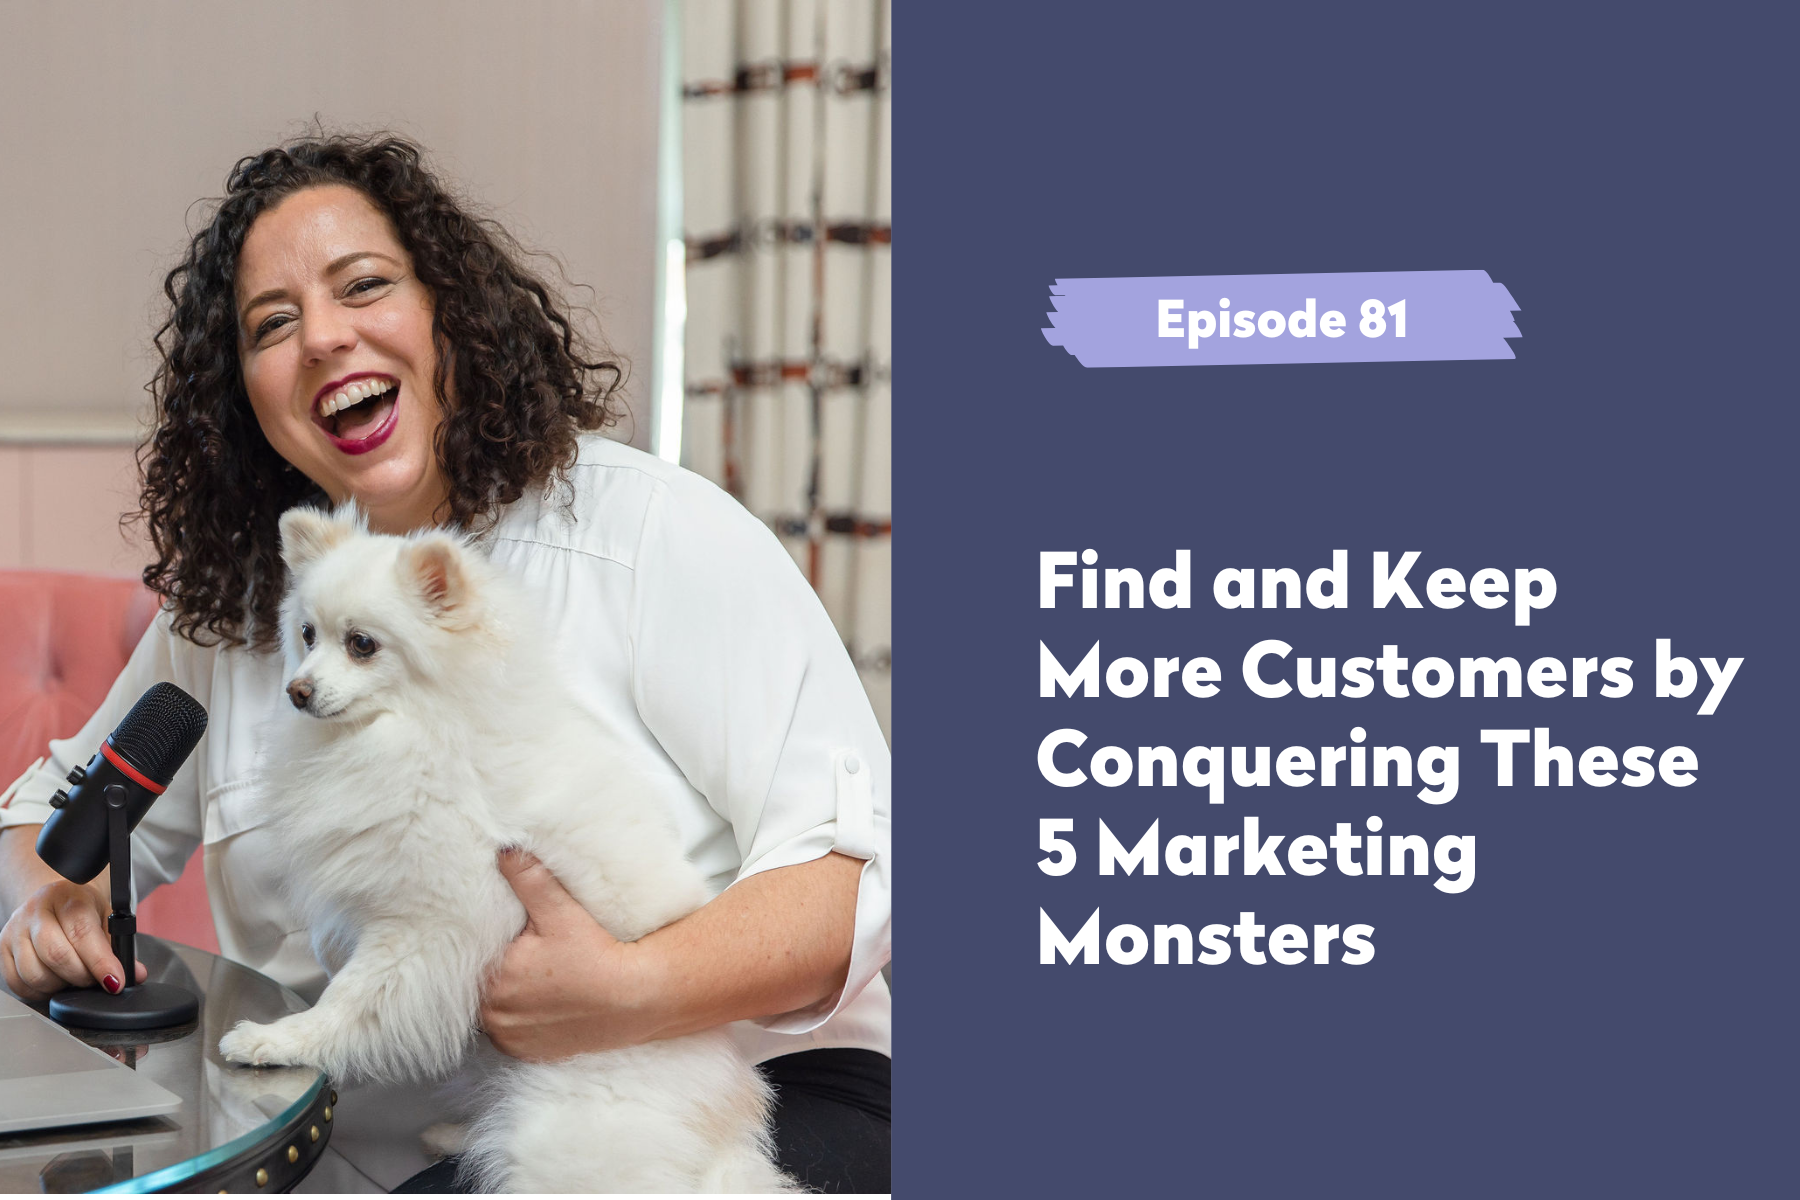 Episode 81 | Find and Keep More Customers by Conquering These 5 Marketing Monsters